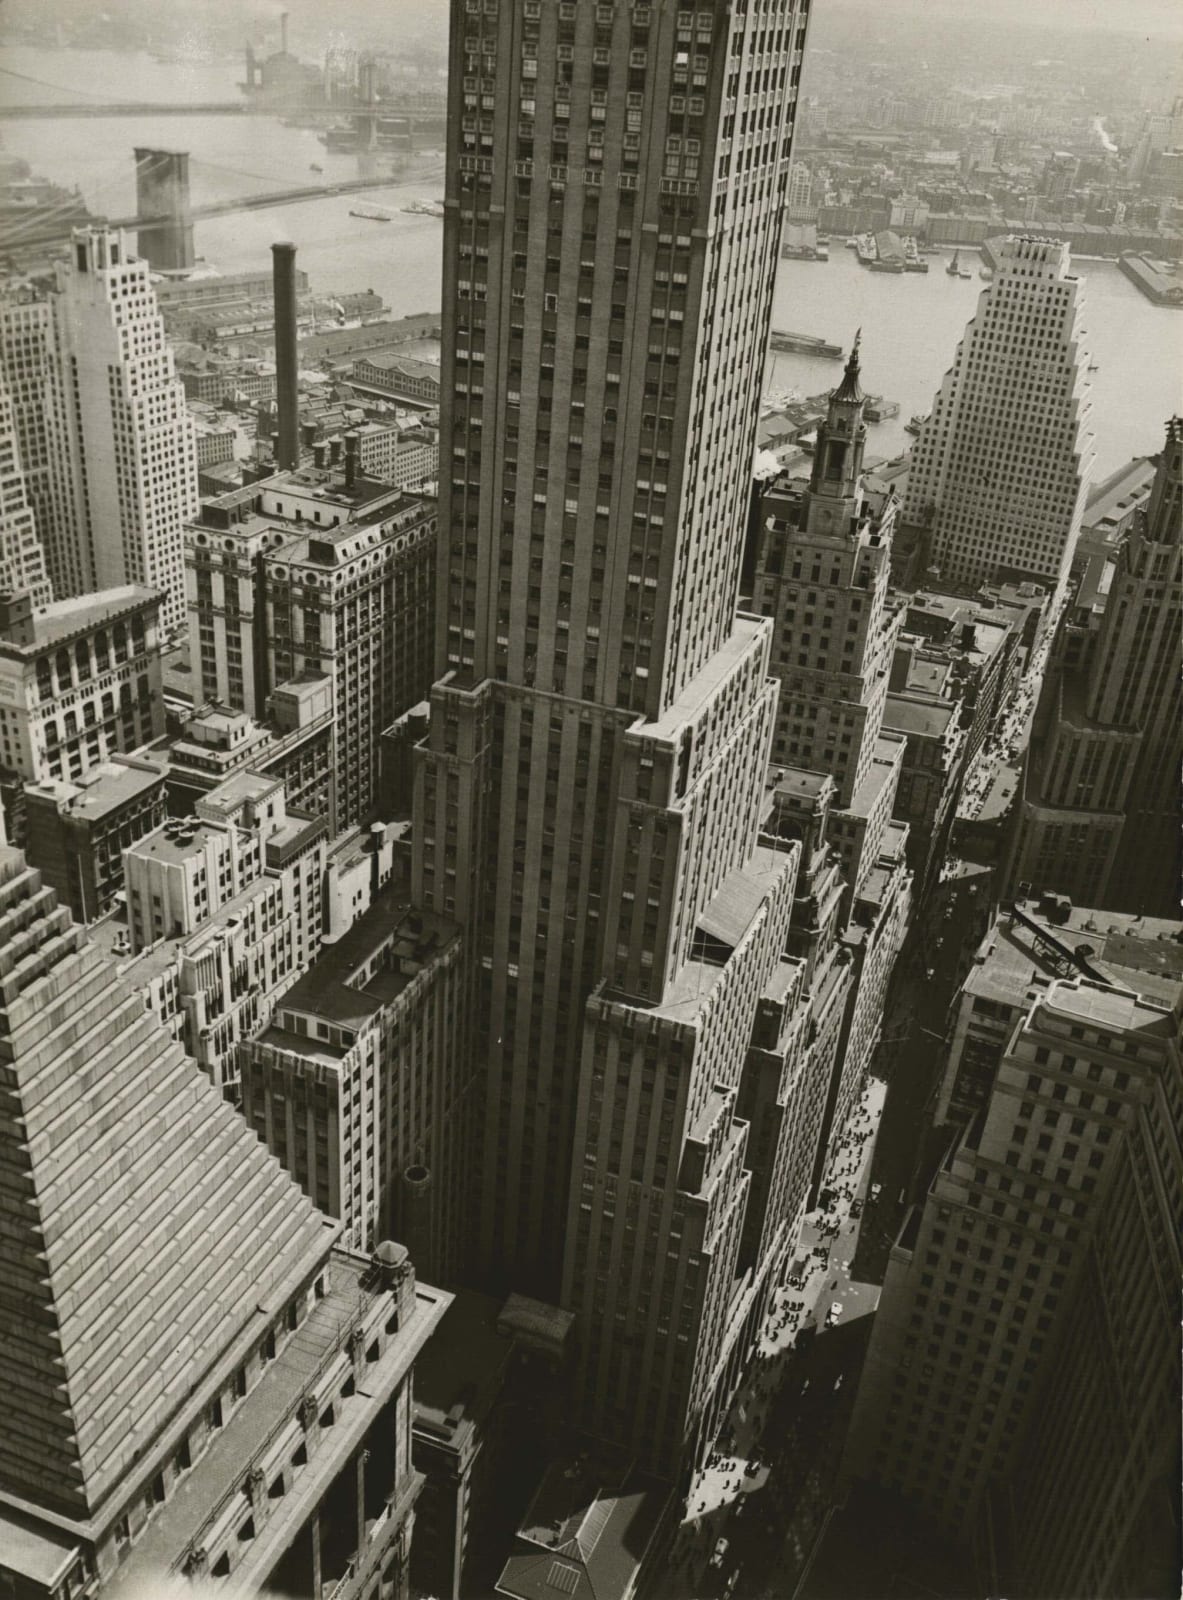 Berenice Abbott photograph of Wall Street District from Roof of Irving Trust Co. Building, Manhattan